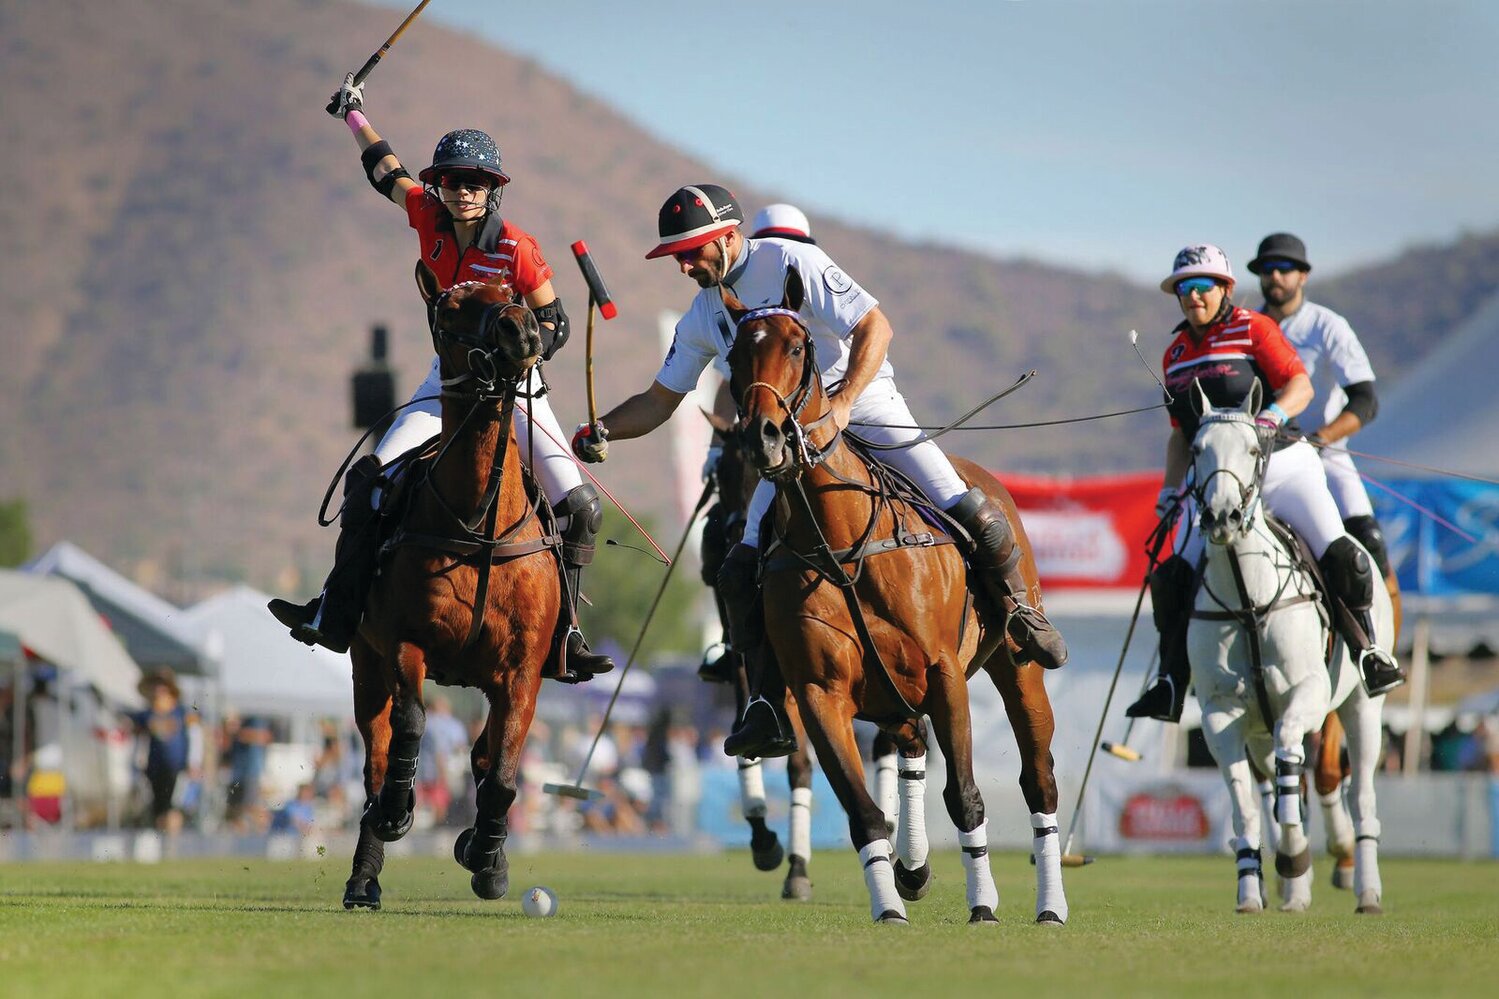 12th annual Bentley Scottsdale Polo Championships returns to Scottsdale Saturday, Nov. 4 (Submitted photo)